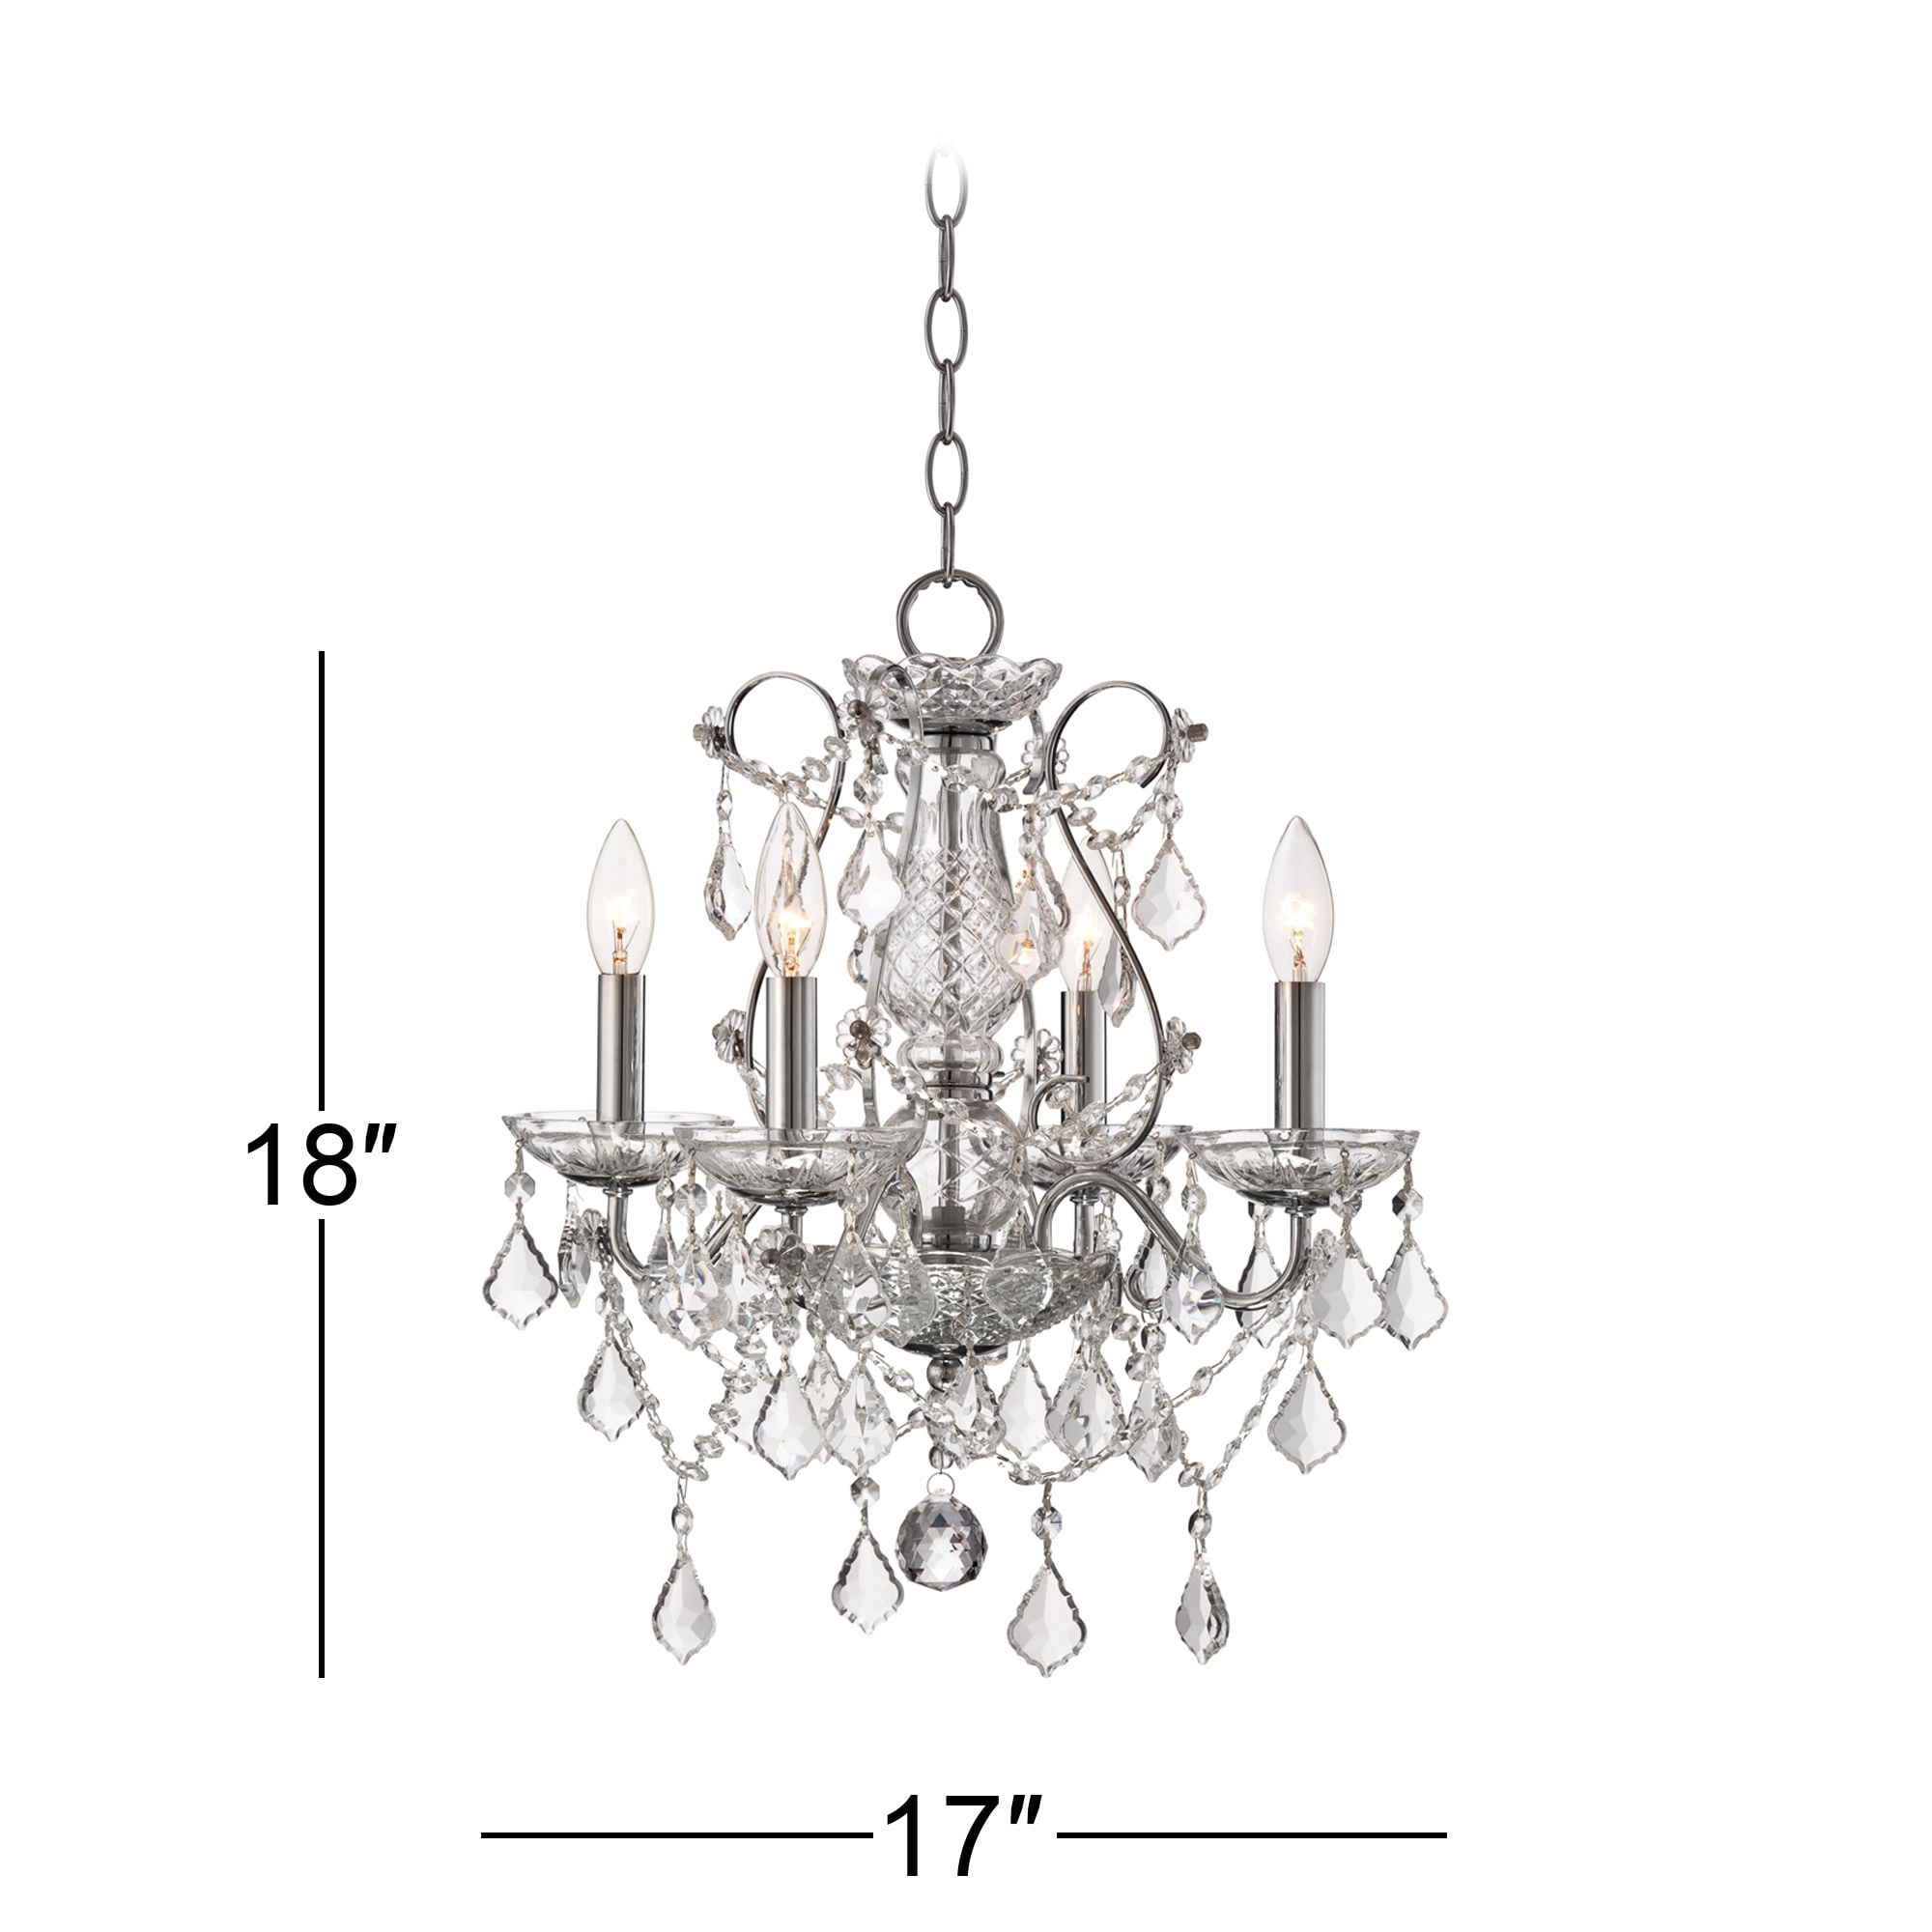 The Original Gypsy Color 4 Light Small Crystal Chandelier for H 17.5 x W 15 White Metal Frame with Clear Poly-carbonate Crystals 